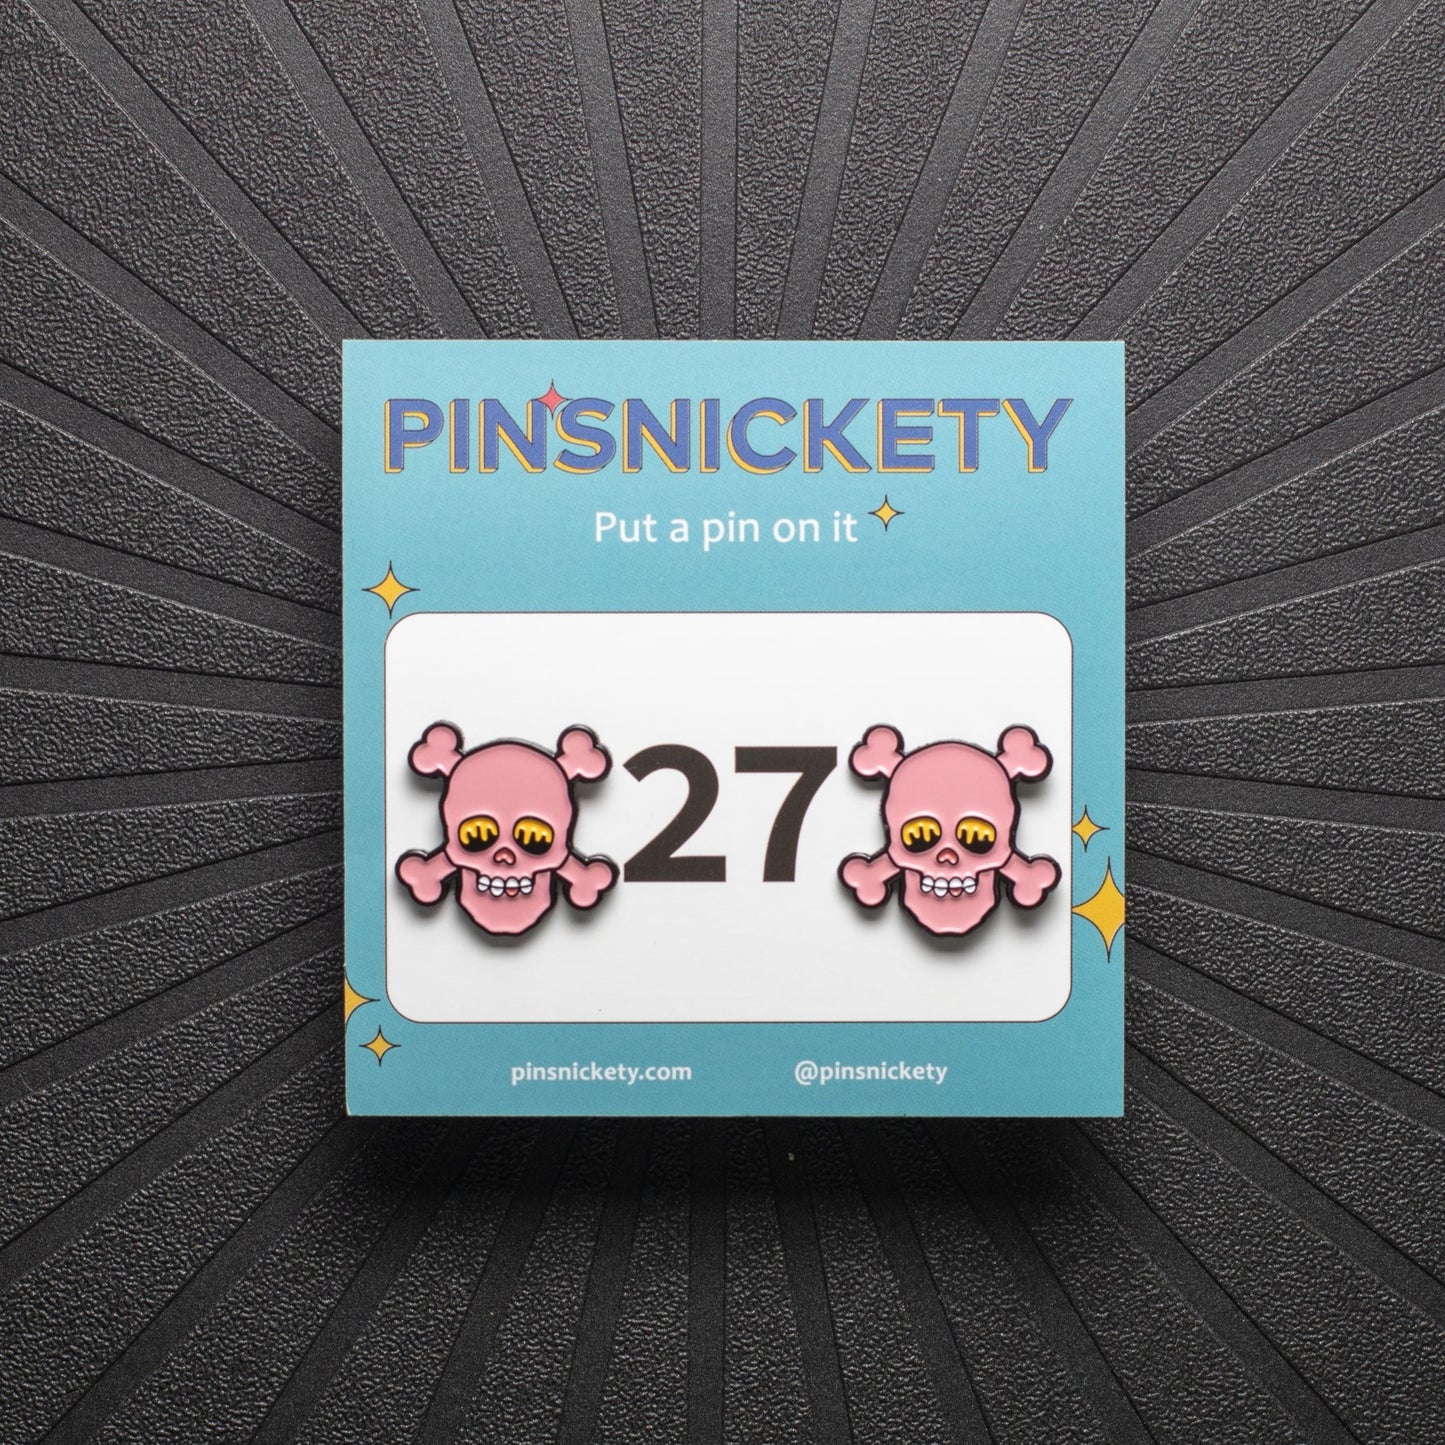 Pinsnickety special edition pink skull horse show number pins on their product packaging card